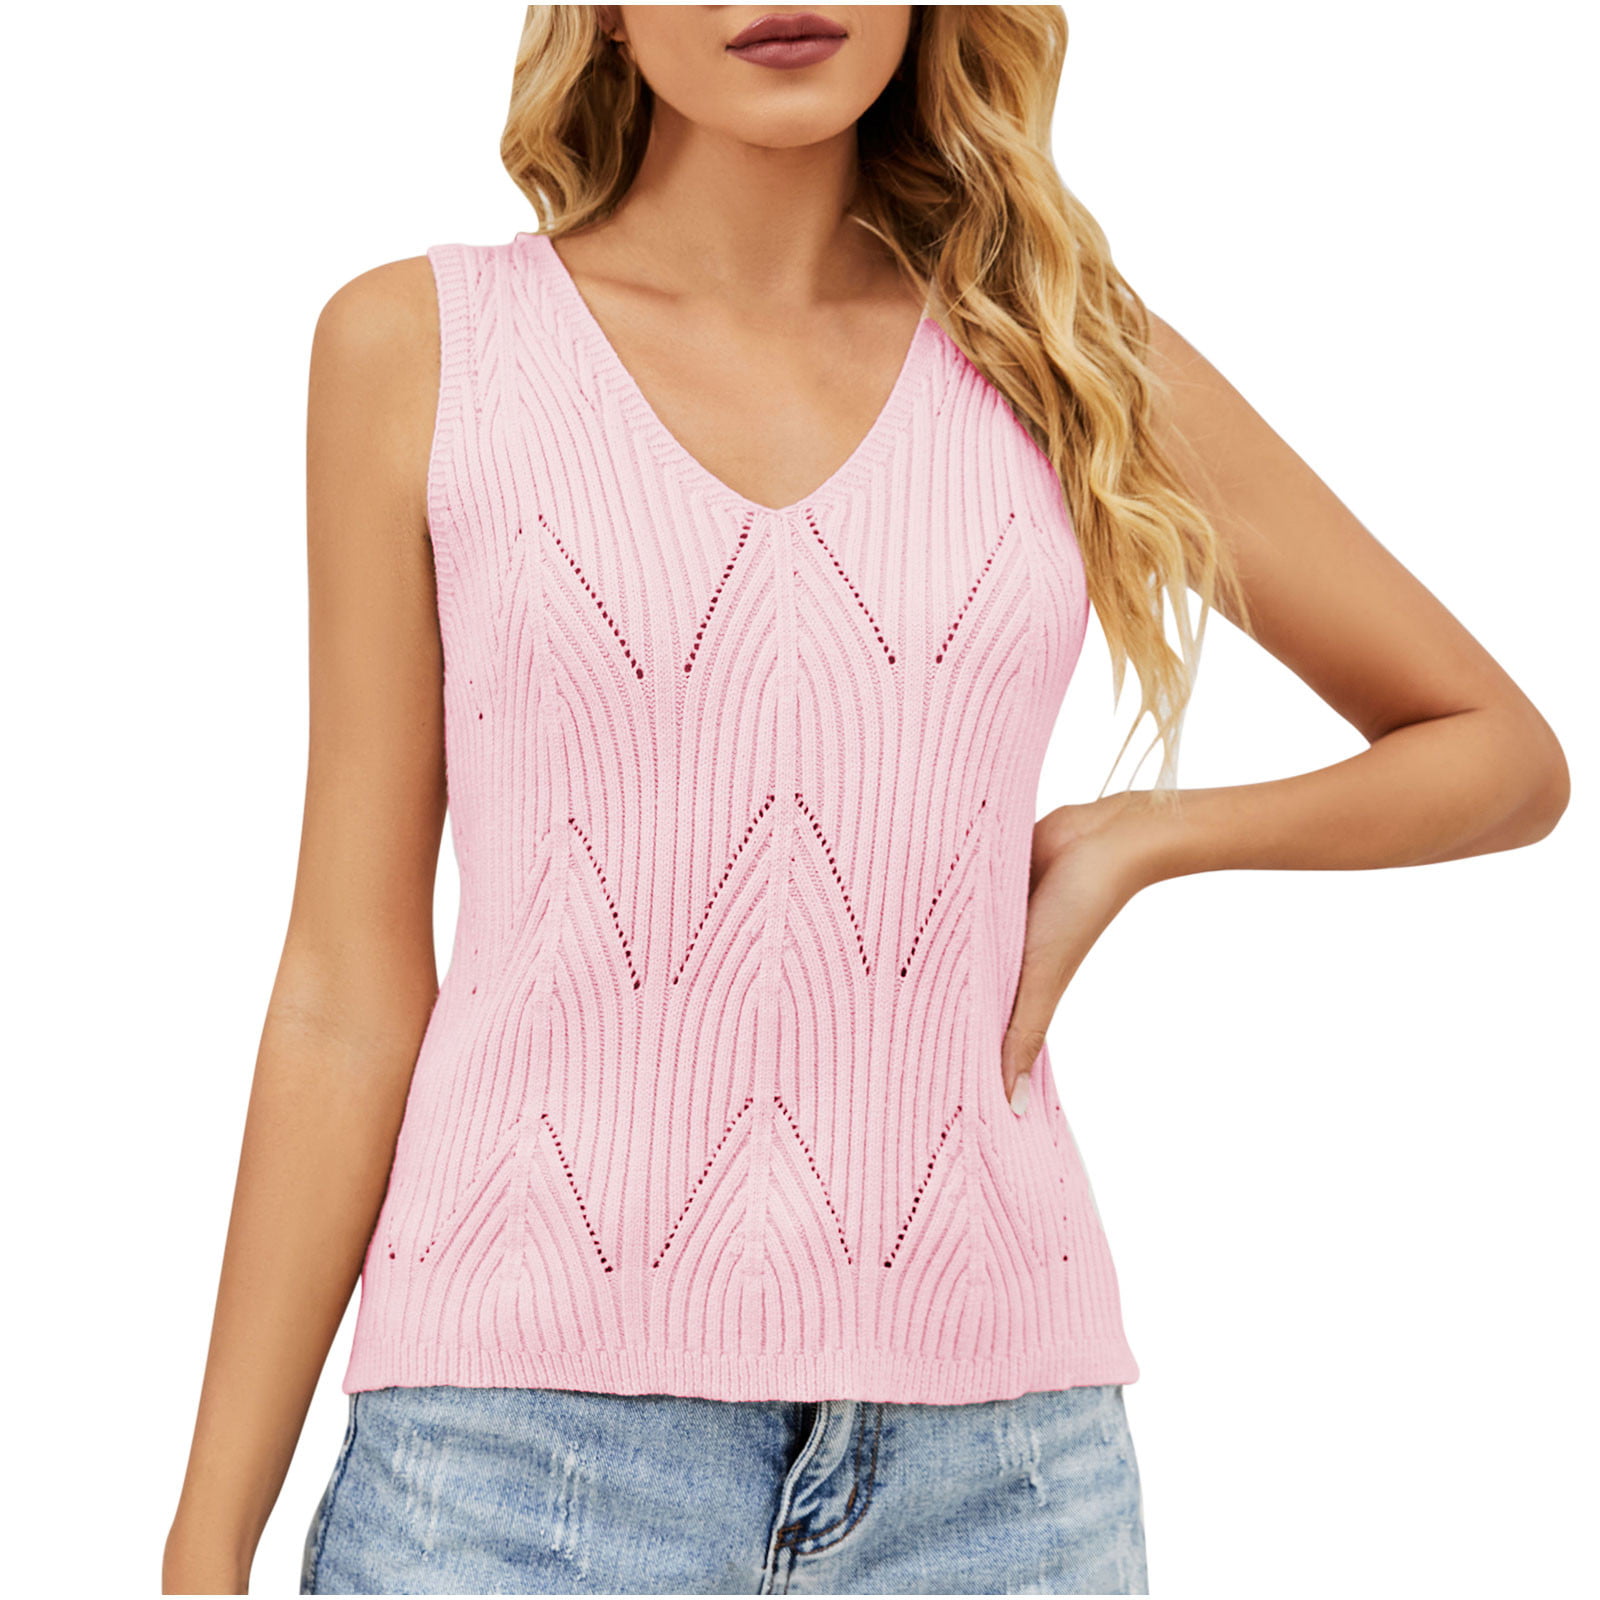 XFLWAM Women's Sexy Crochet Knit V Neck Tank Tops Sleeveless Hollow Out  Casual Loose Fit Cami Sweater Vest Pink M - Walmart.com